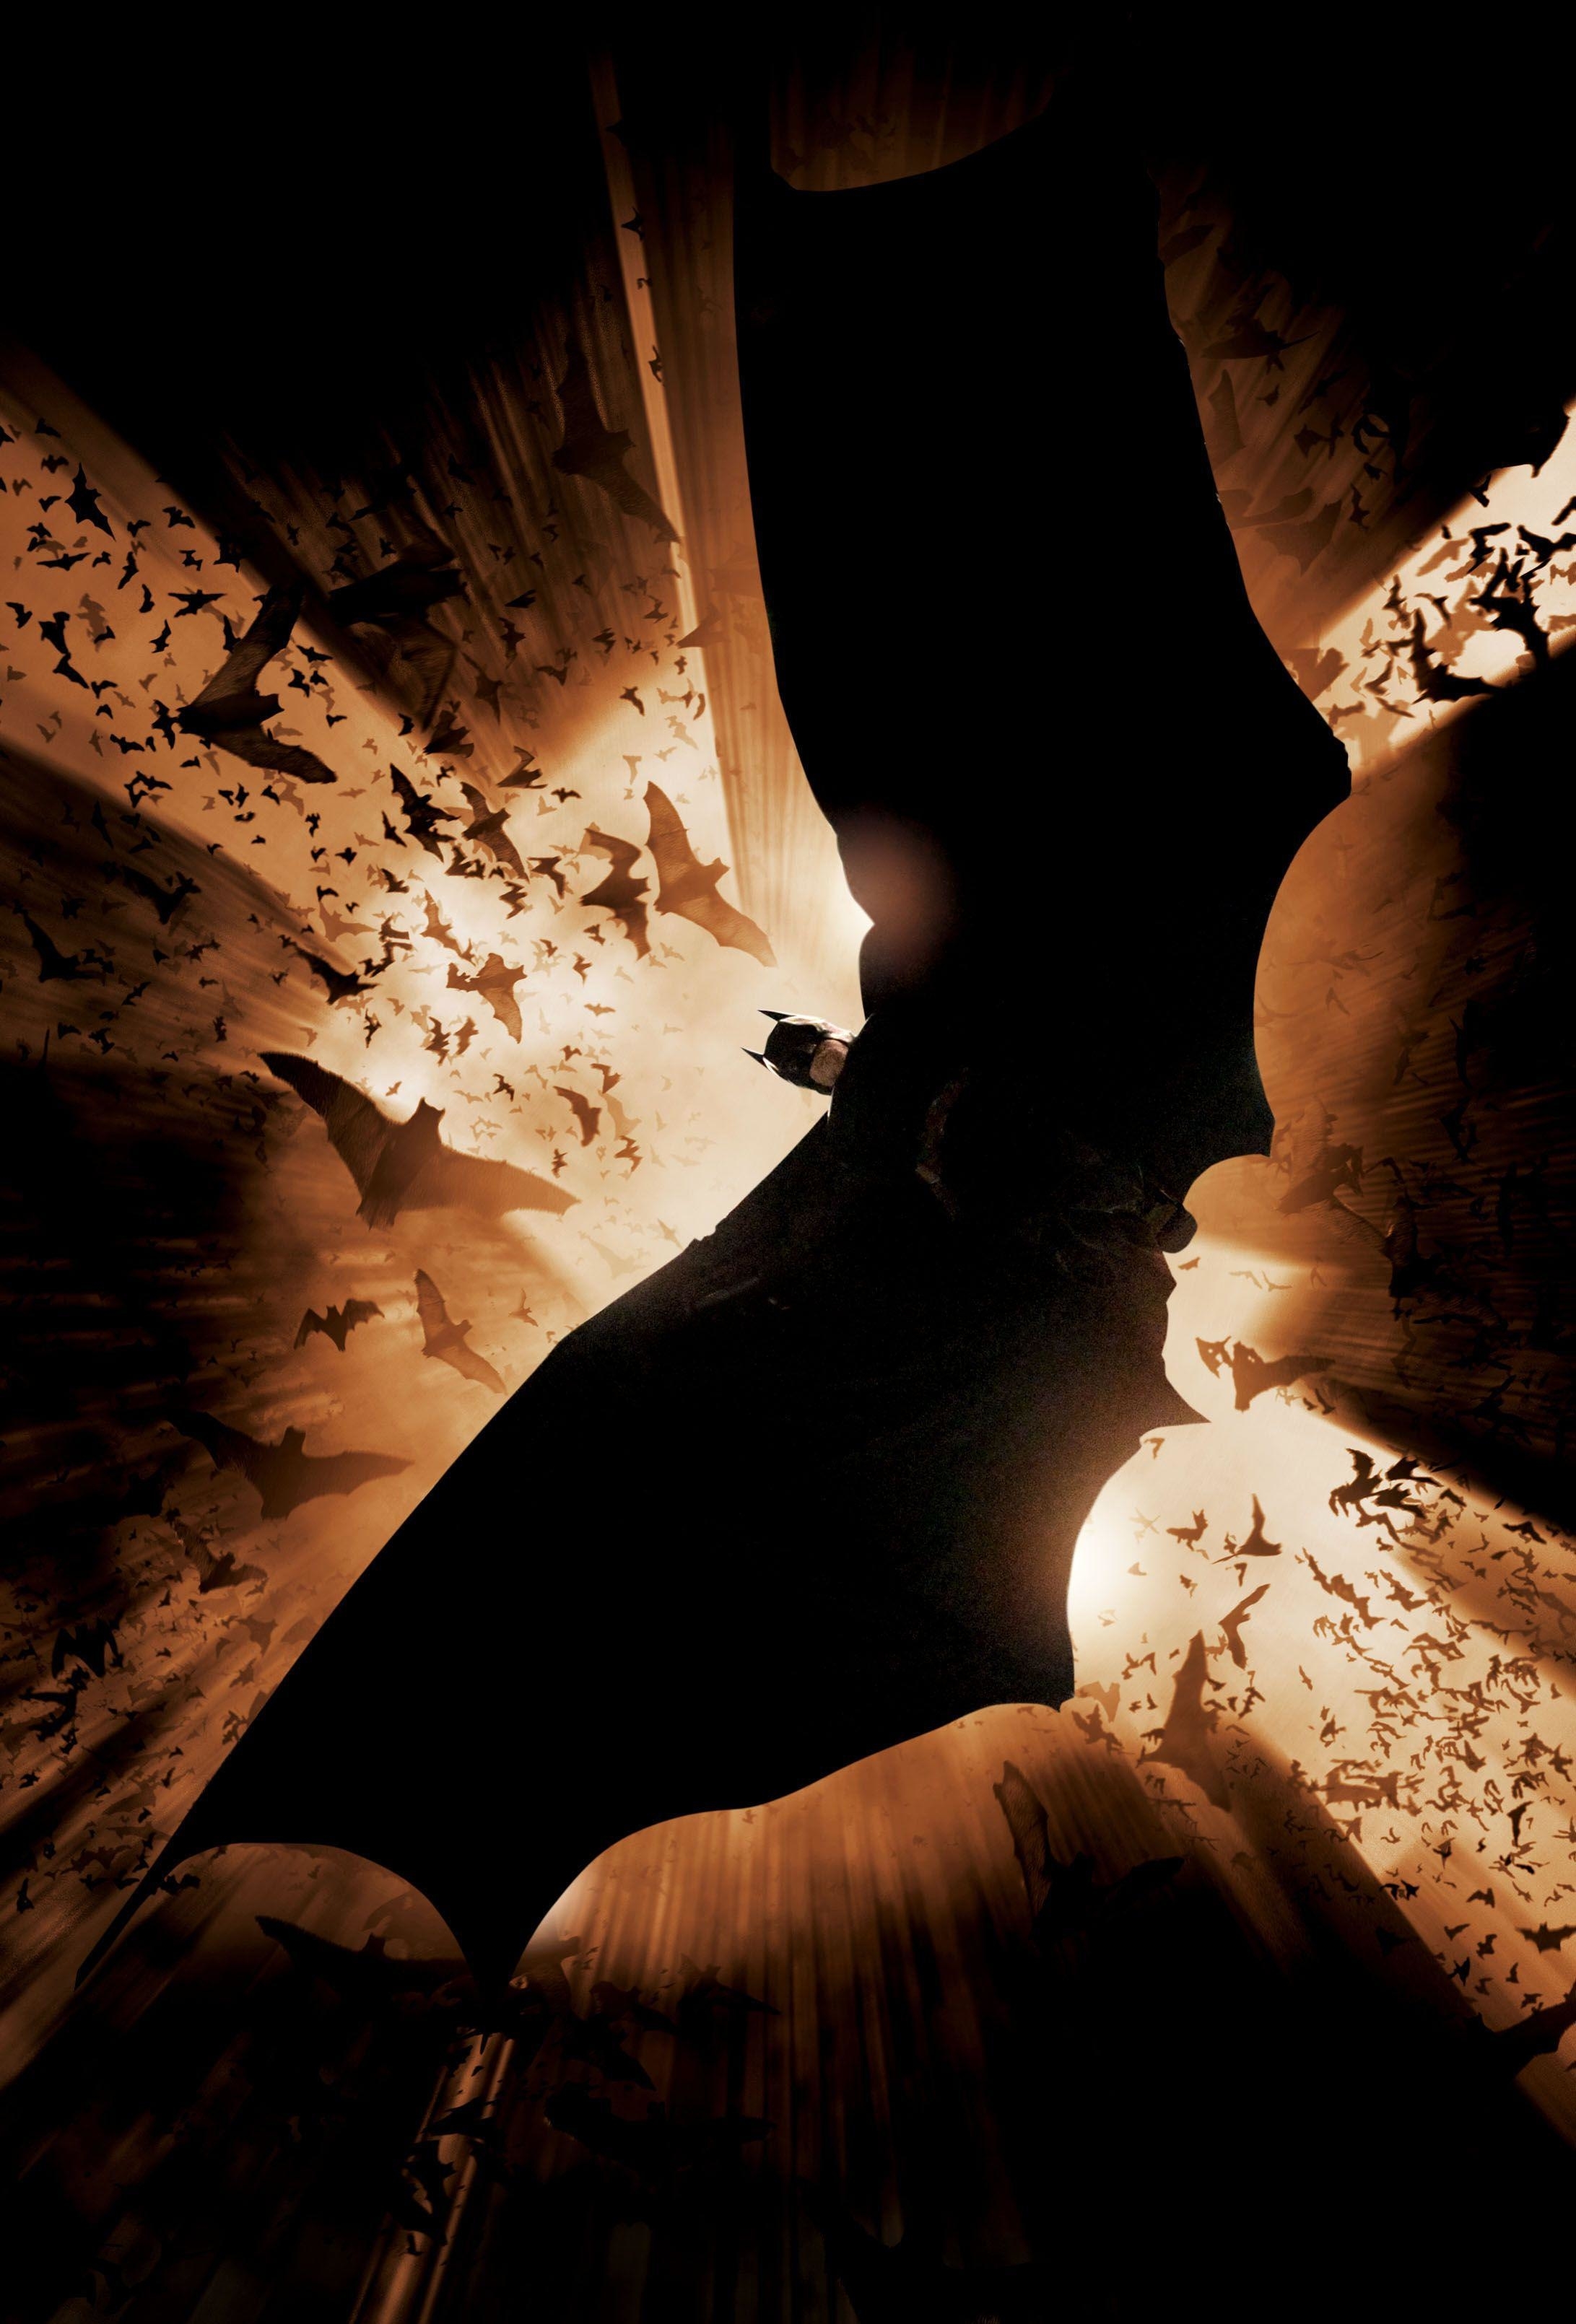 Batman spreads his wings and falls towards us in the Batman Begins teaser poster.